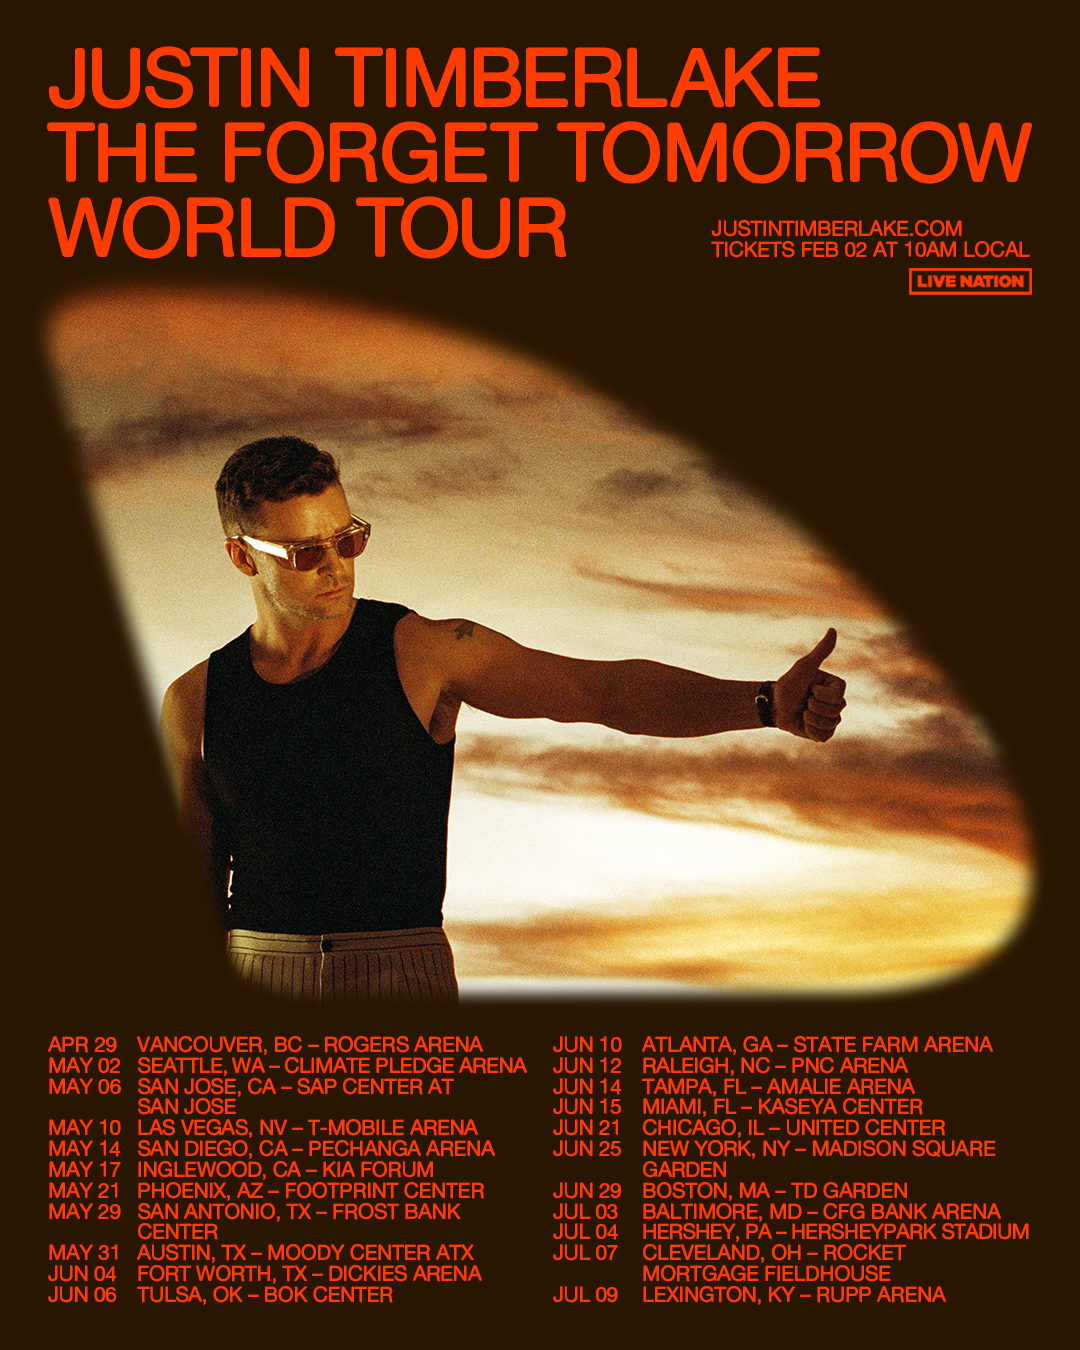 Justin Timberlake - The Forget Tomorrow World Tour at BOK Center Tickets